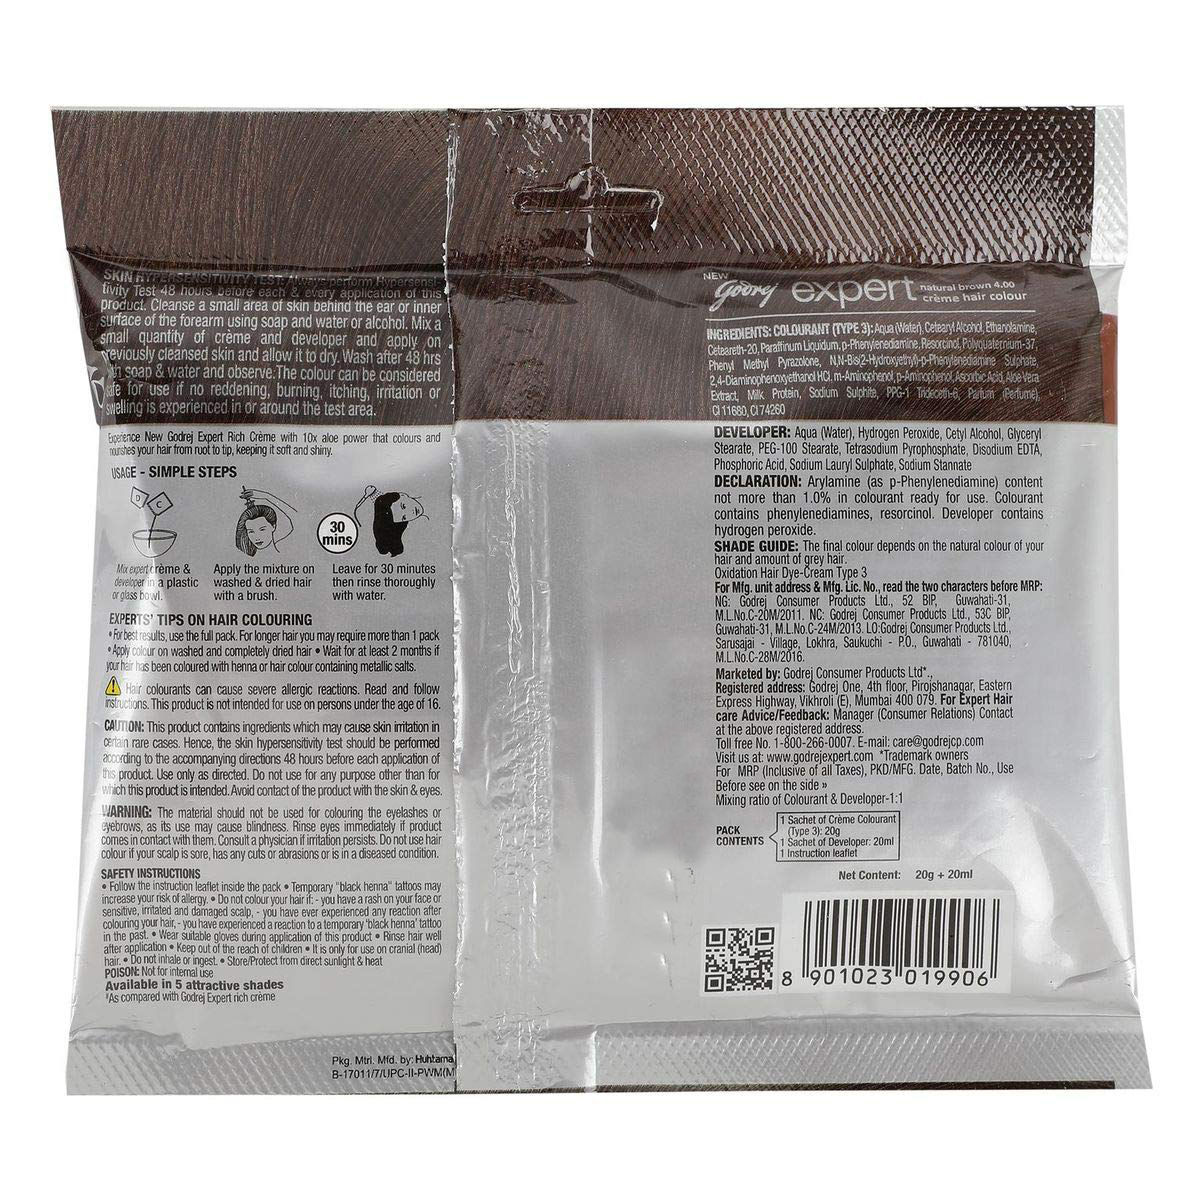 Godrej Expert Rich Creme Natural Brown  Hair Colour, 1 Kit Price, Uses,  Side Effects, Composition - Apollo Pharmacy